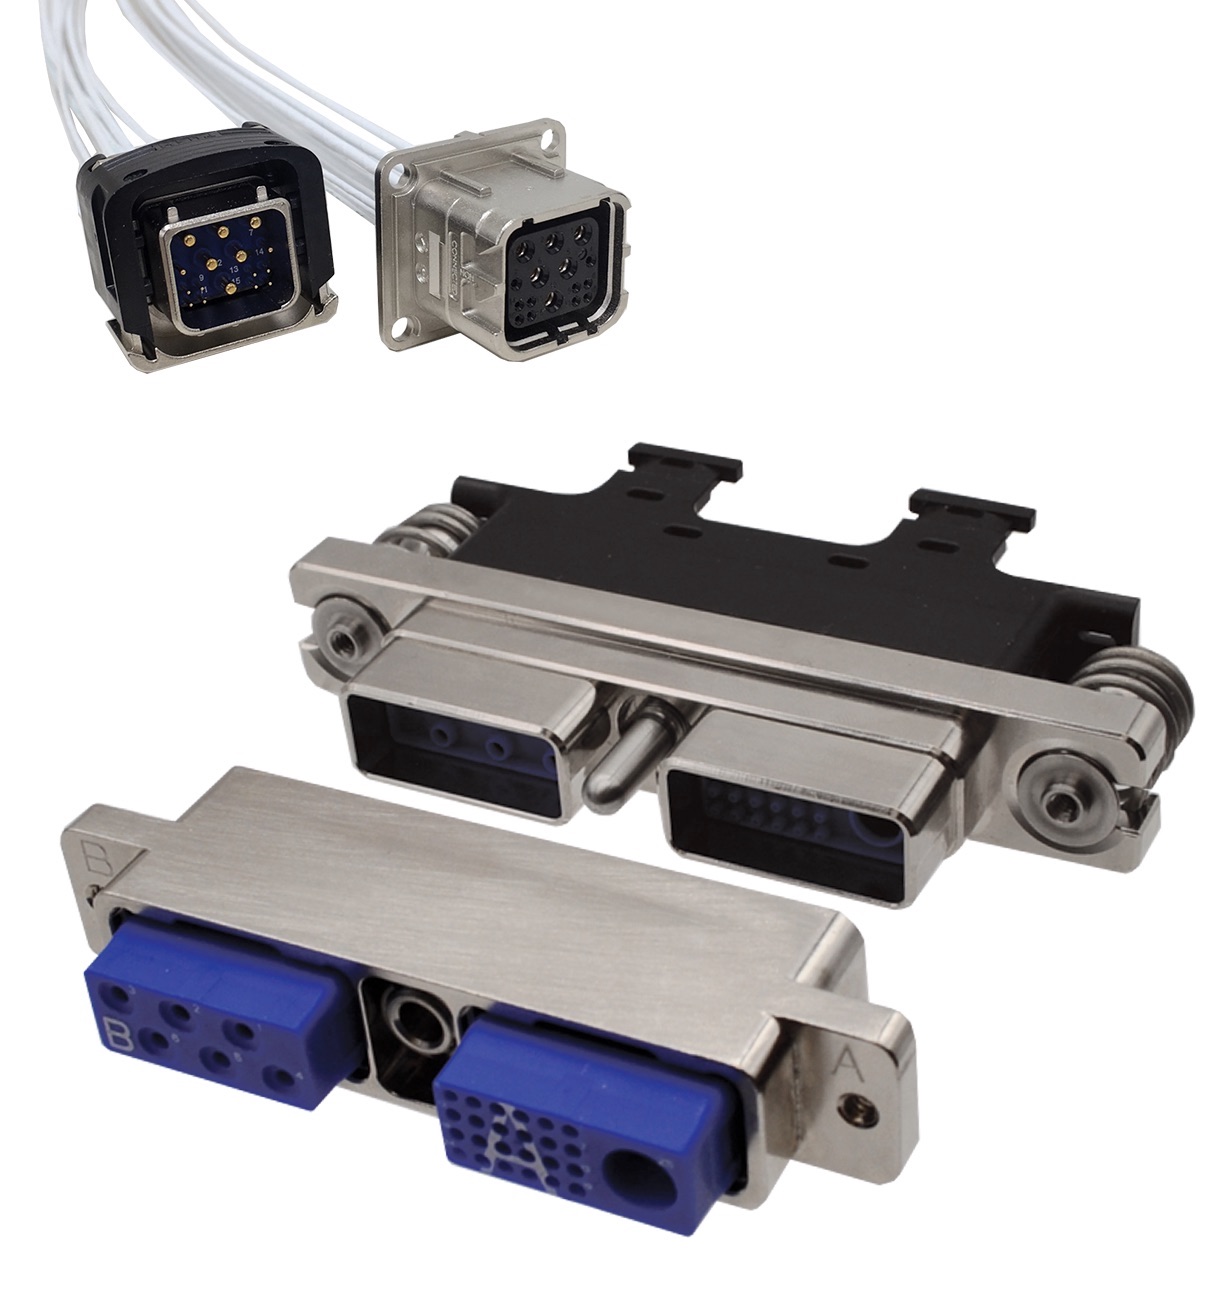 Interconnect solutions for cabin and IFE applications: Cinch Connectivity Solutions’ new C-ENX™ Galley Connectors